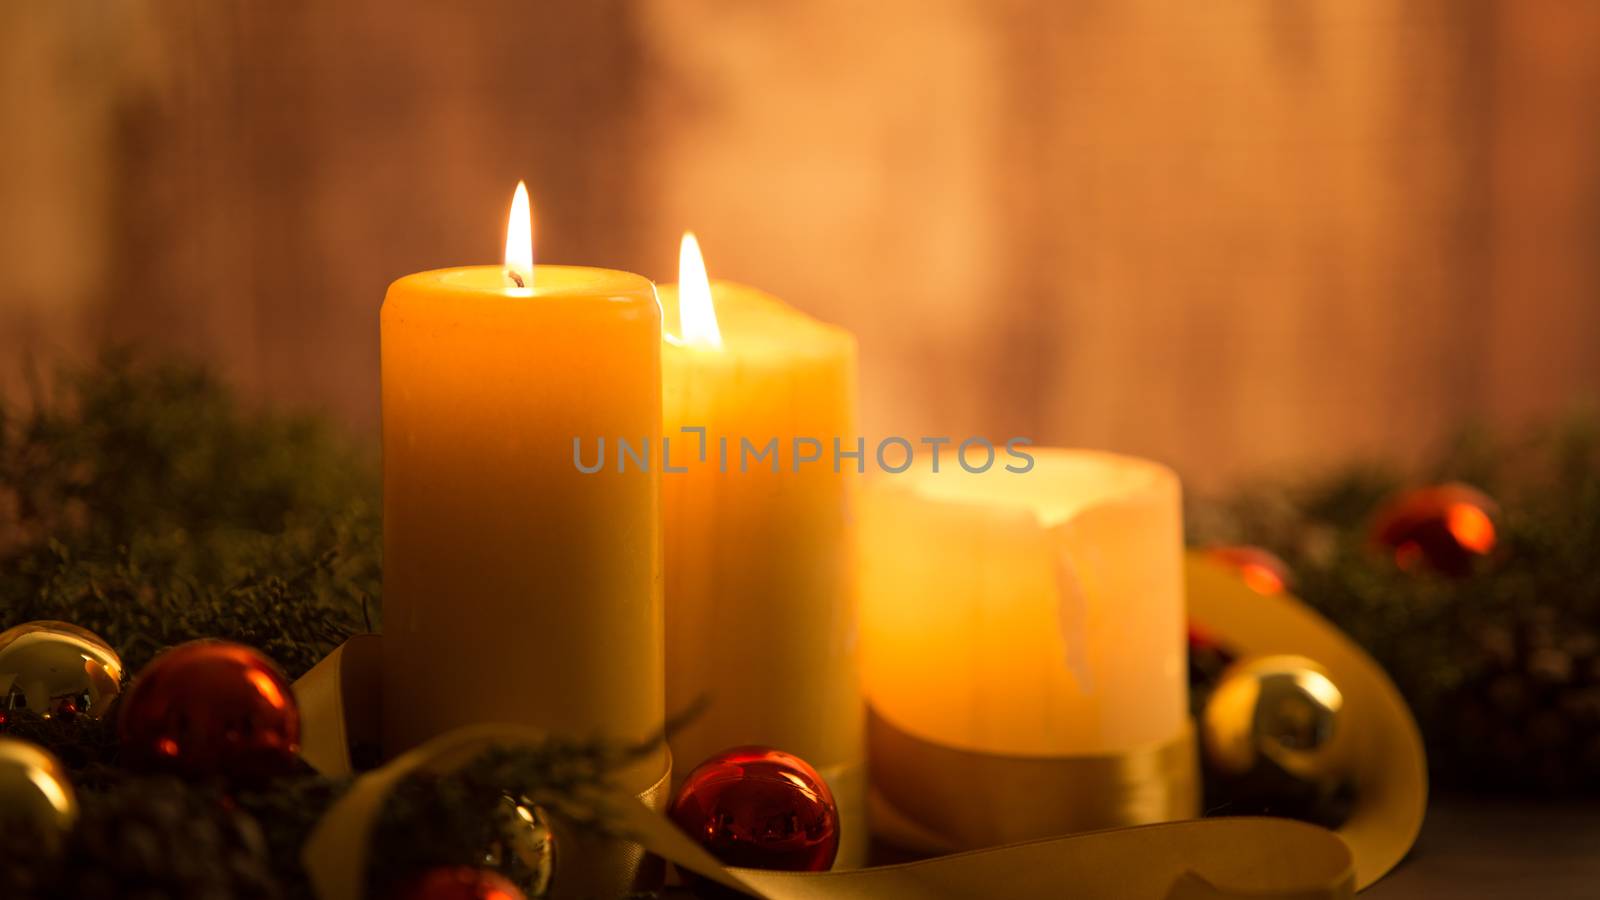 The warmth of the Christmas concept: close up of three candles lit on a dark wooden table and with pine branches, natural pine cones and gold and red bright baubles with a gold satin ribbon